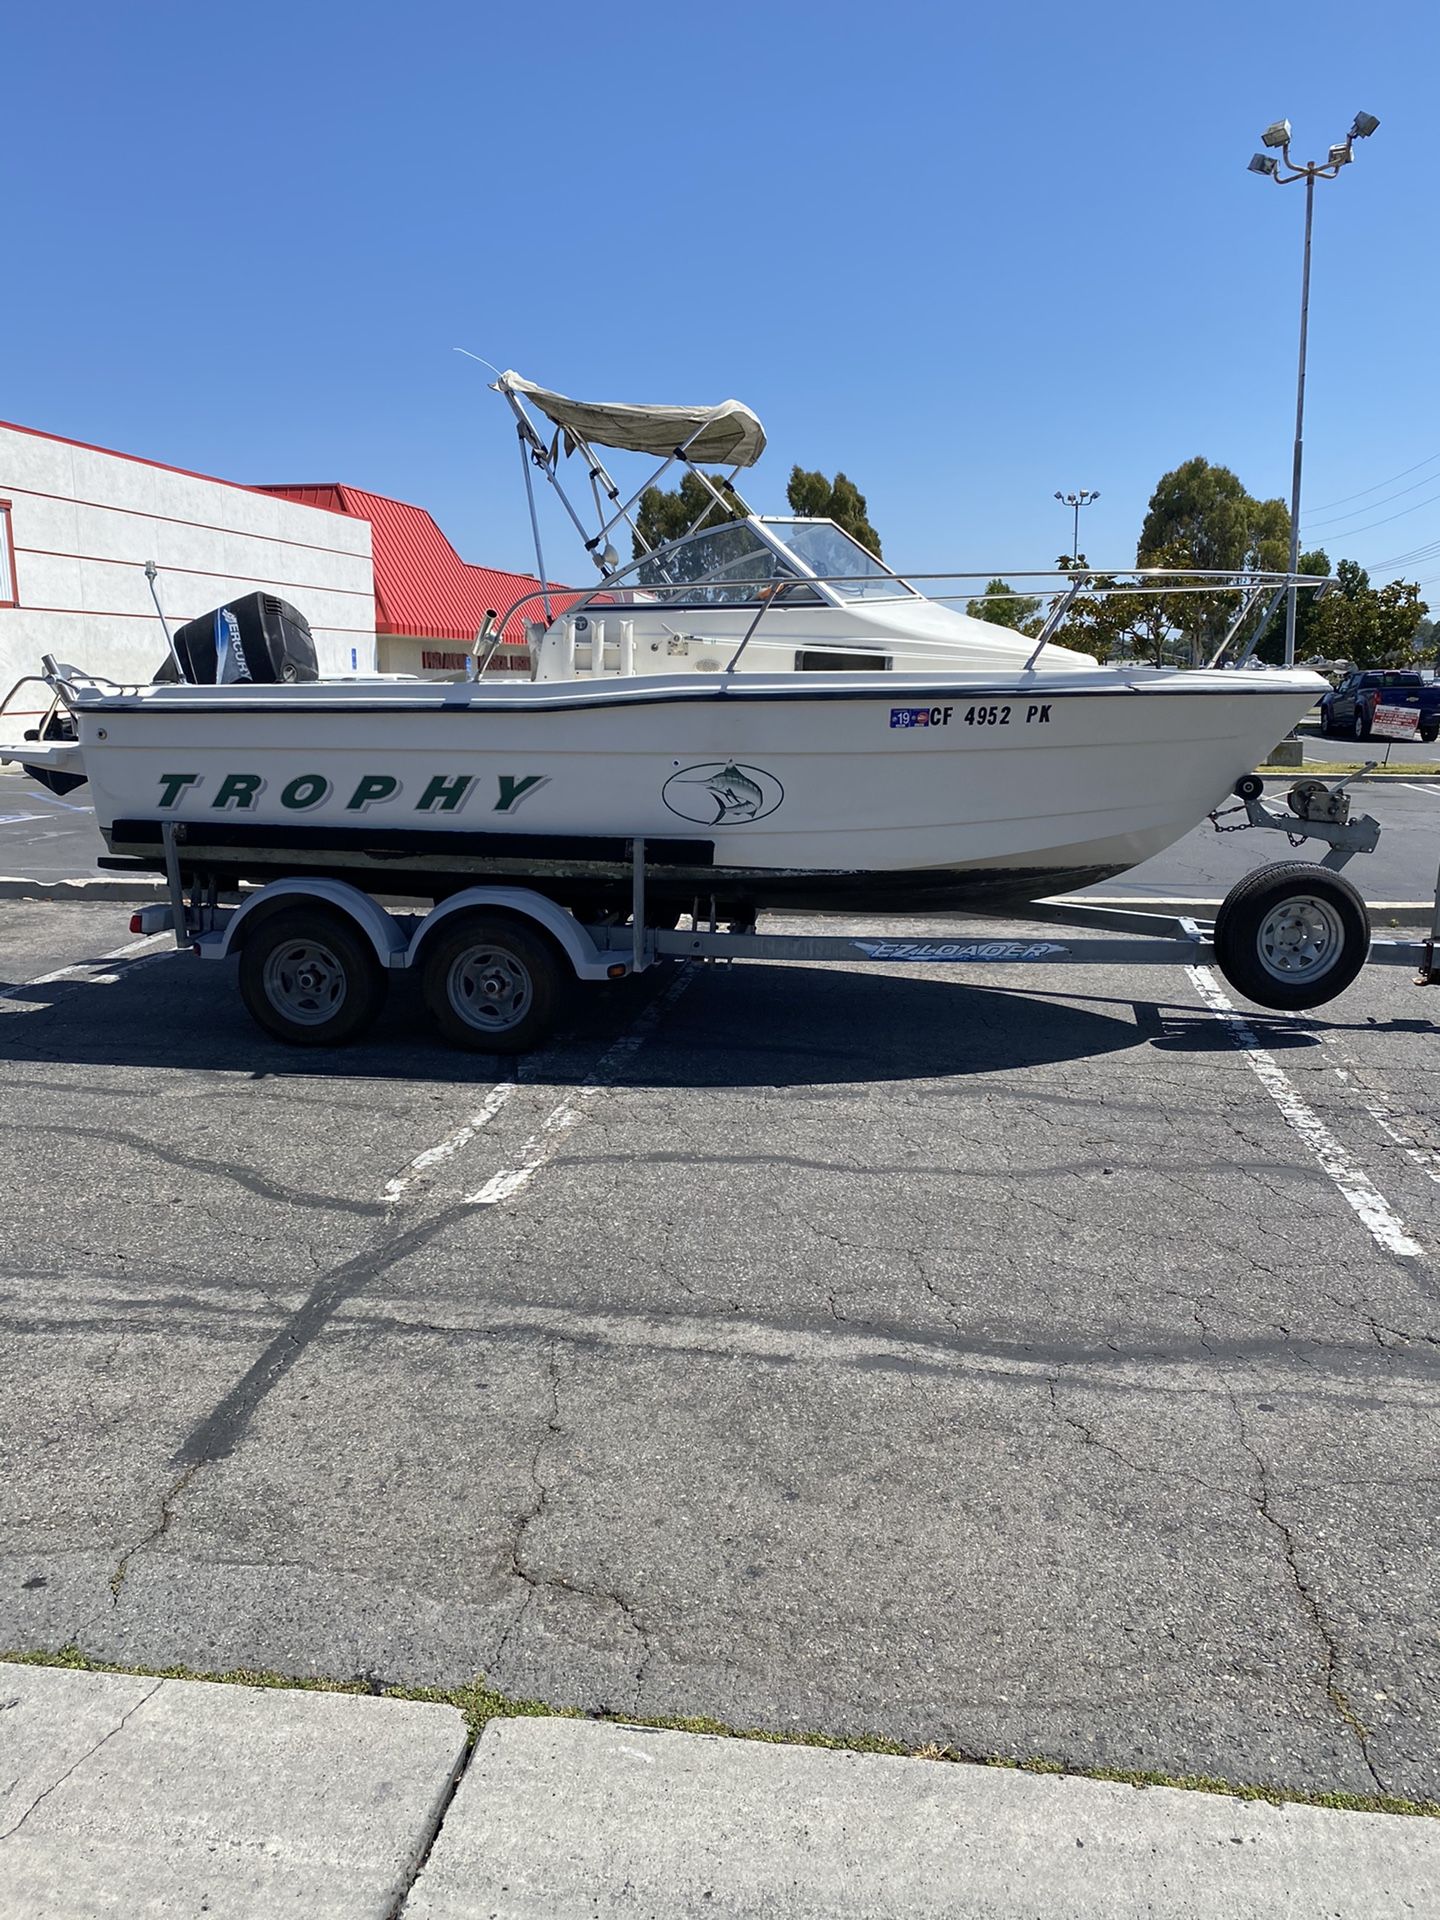 2000 18ft Bayliner Trophy cuddy cabin fishing boat with 125hp mercury and galvanized trailer